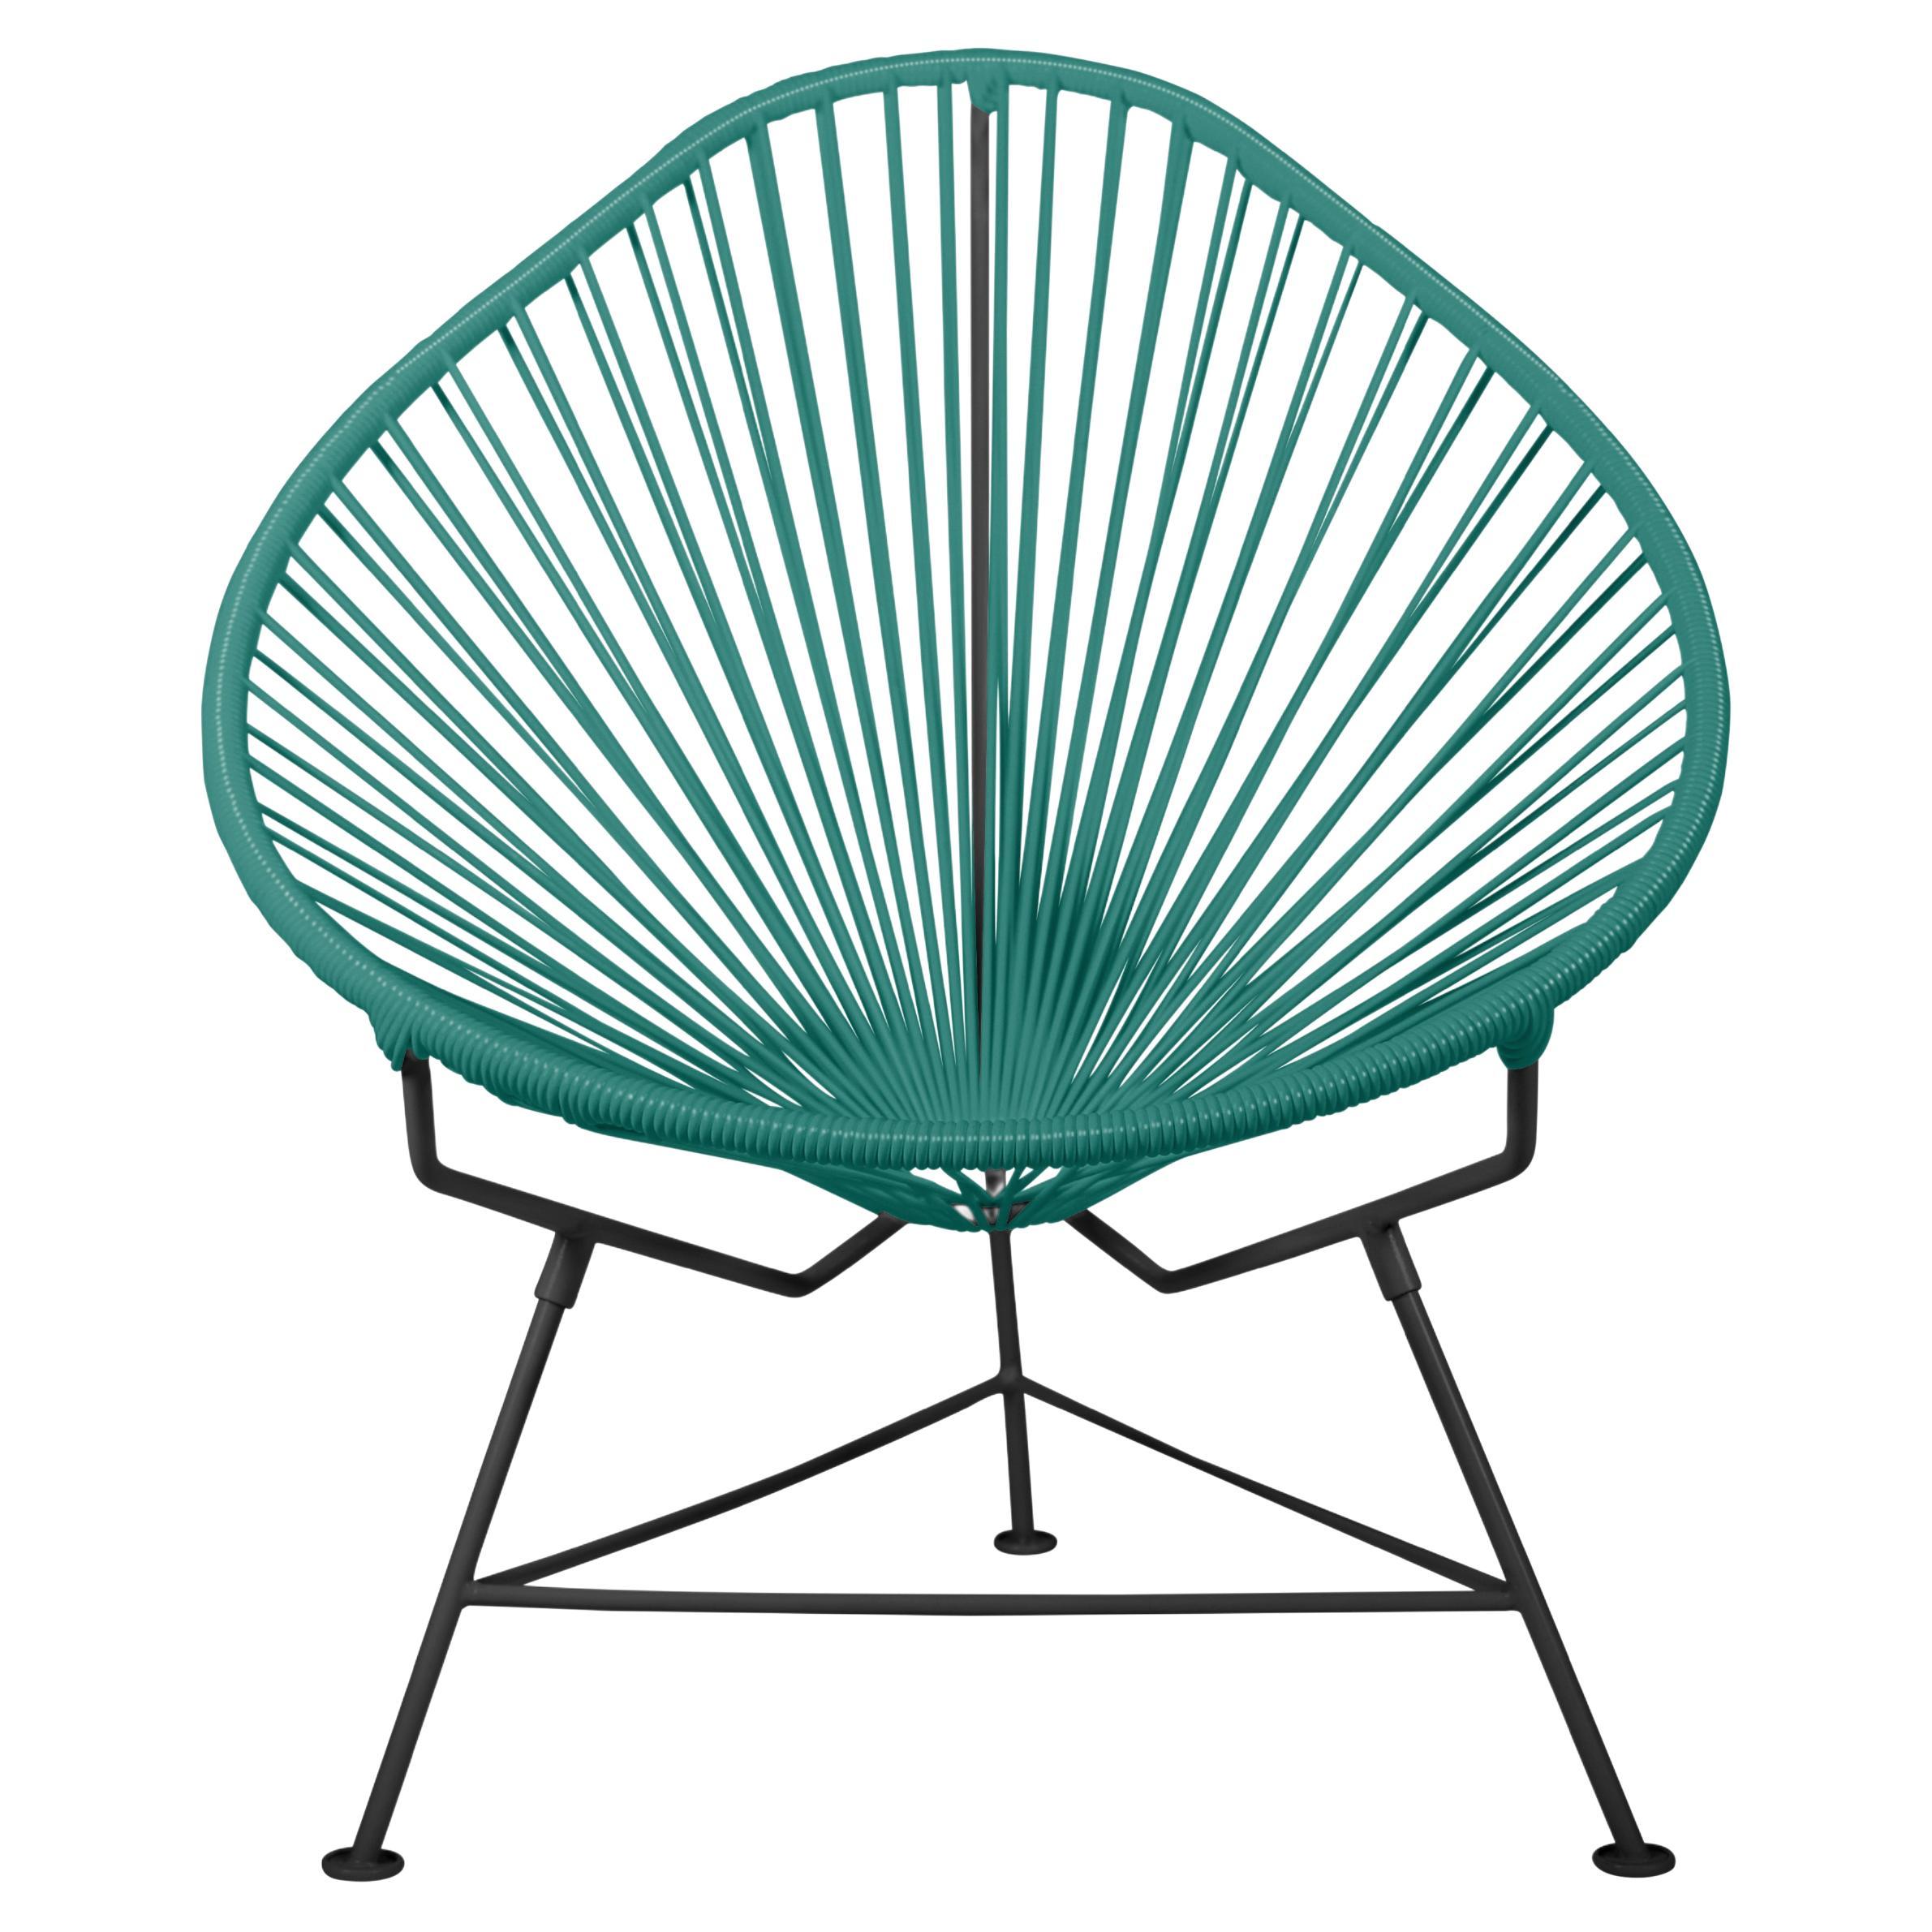 Innit Designs Acapulco Chair Turquoise Weave on Black Frame